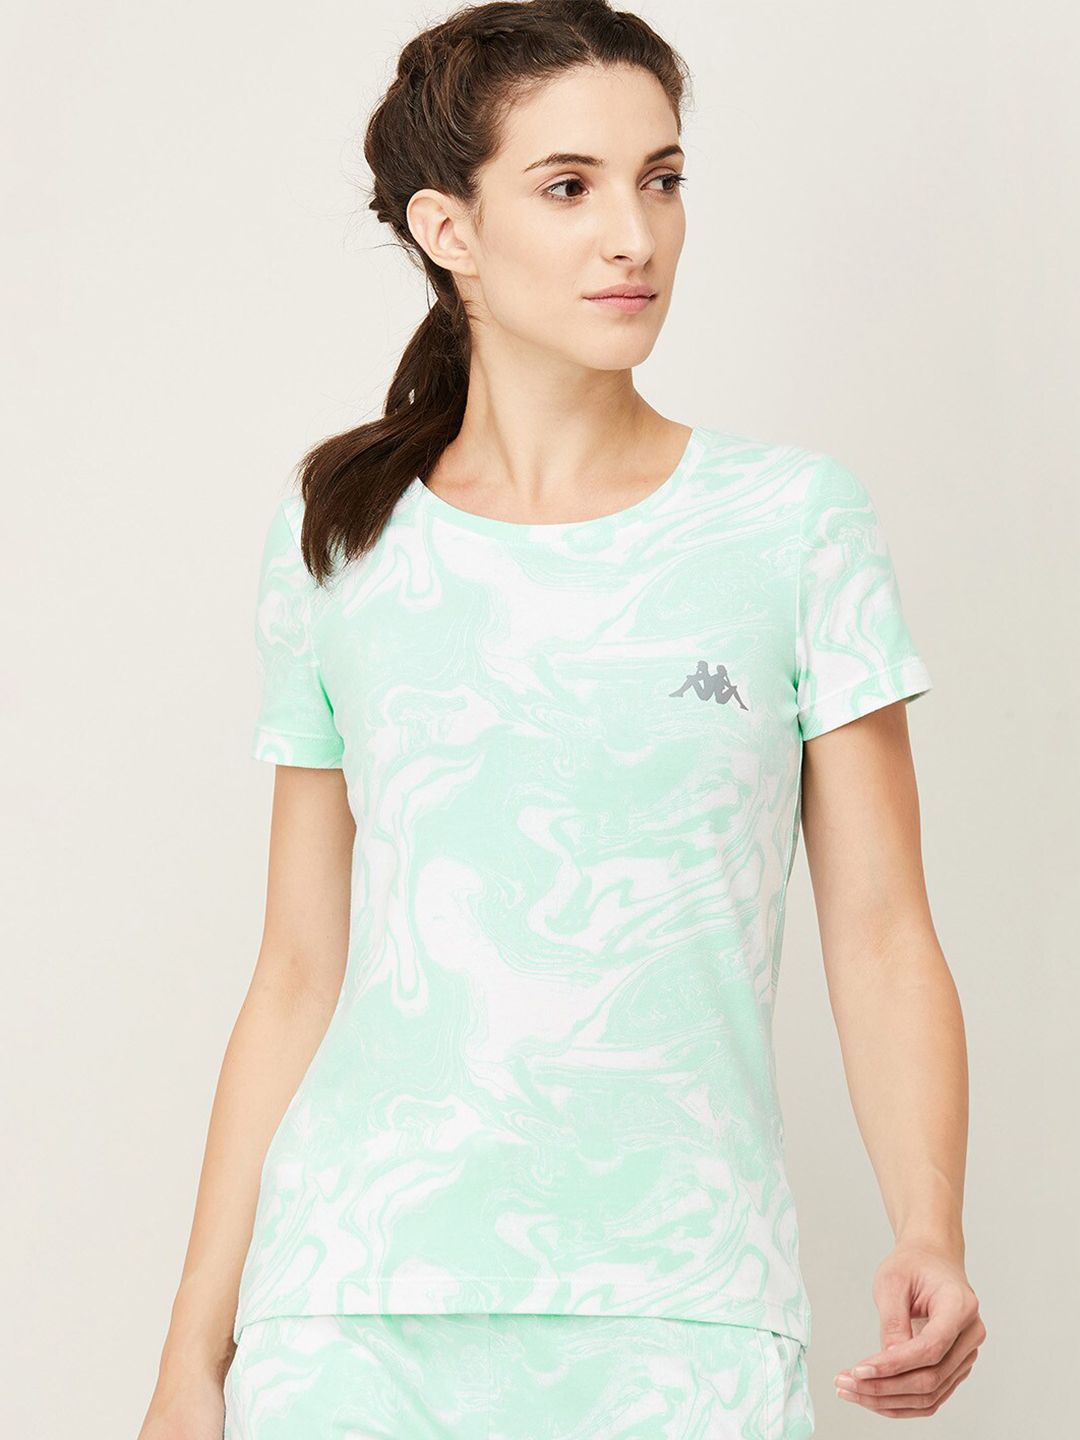 Kappa Women Mint Green Abstract Printed Regular Fit T-shirt Price in India